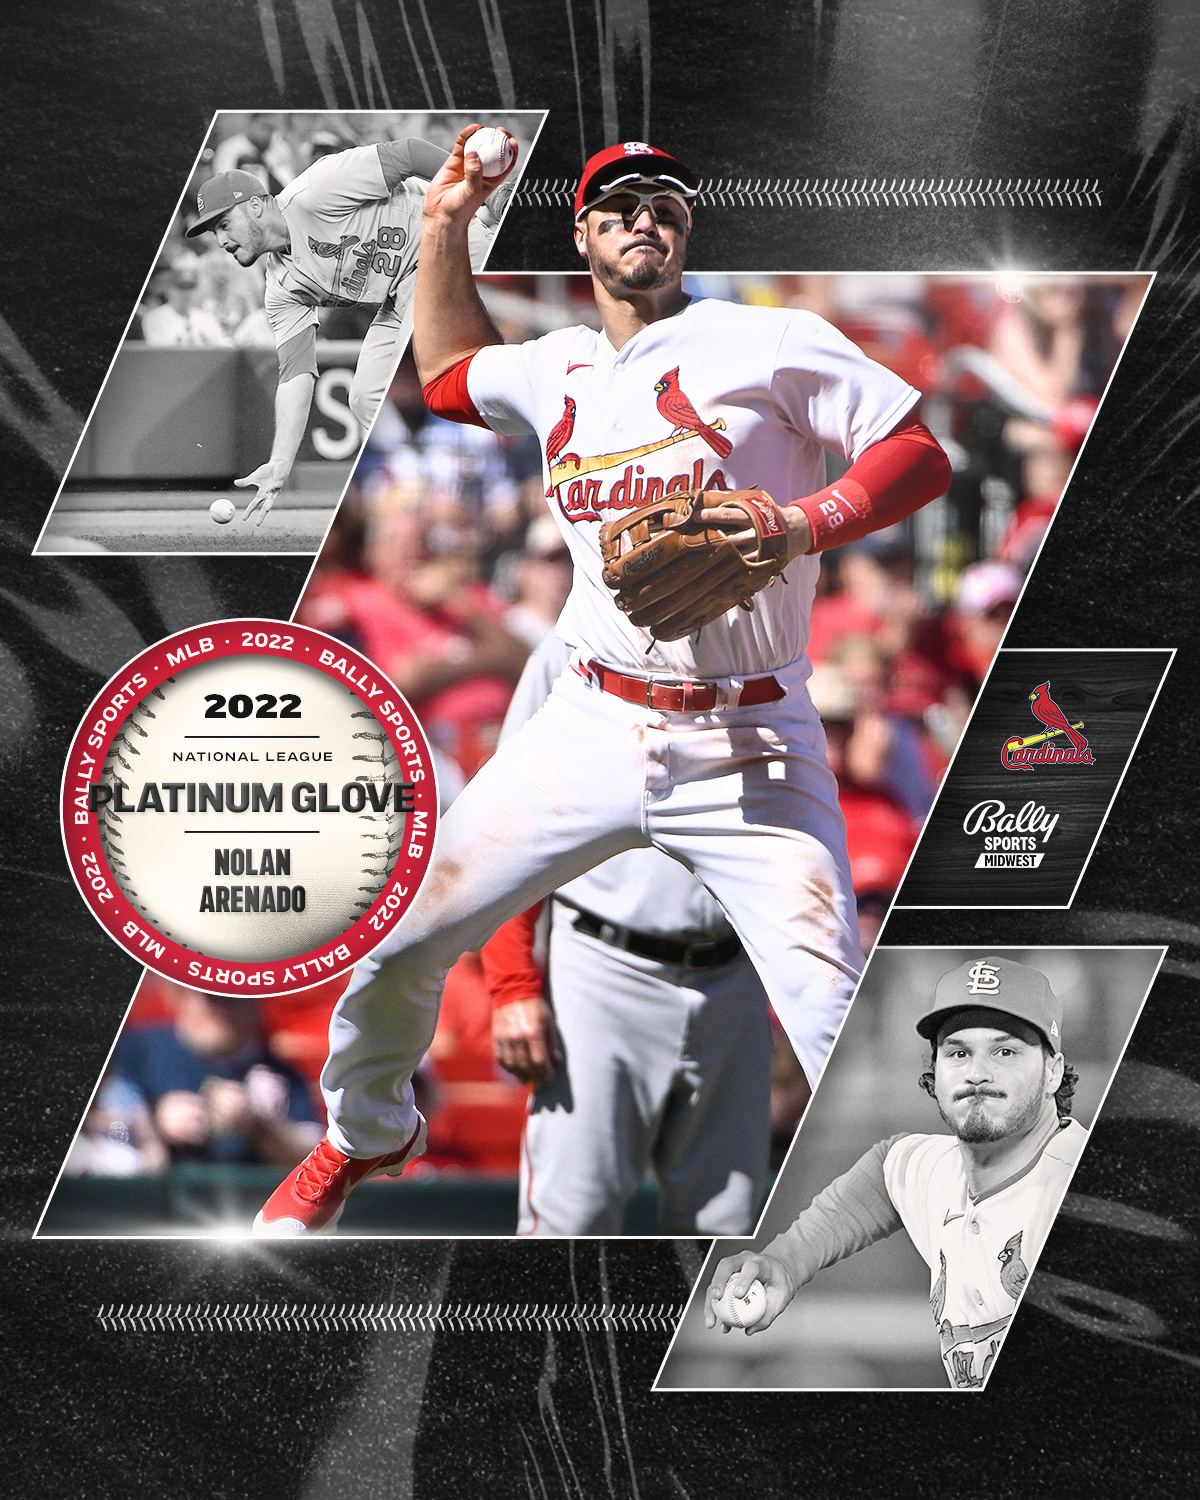 Bally Sports Midwest on X: Simply amazing. Albert Pujols hits